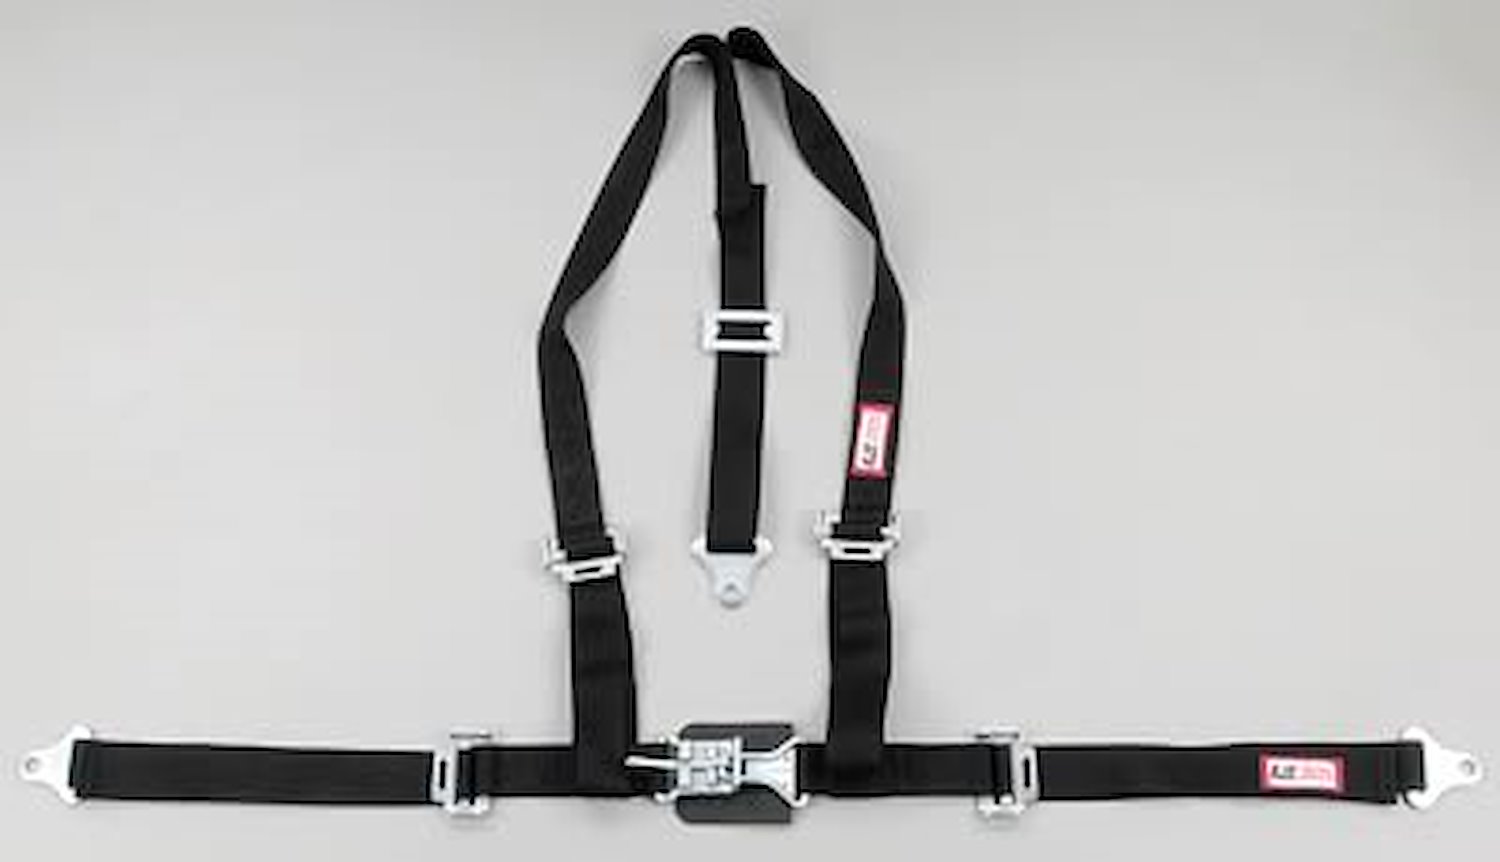 NON-SFI L&L HARNESS 3 PULL DOWN Lap Belt SEWN IN 2 S.H. Individual FLOOR Mount ALL WRAP ENDS YELLOW